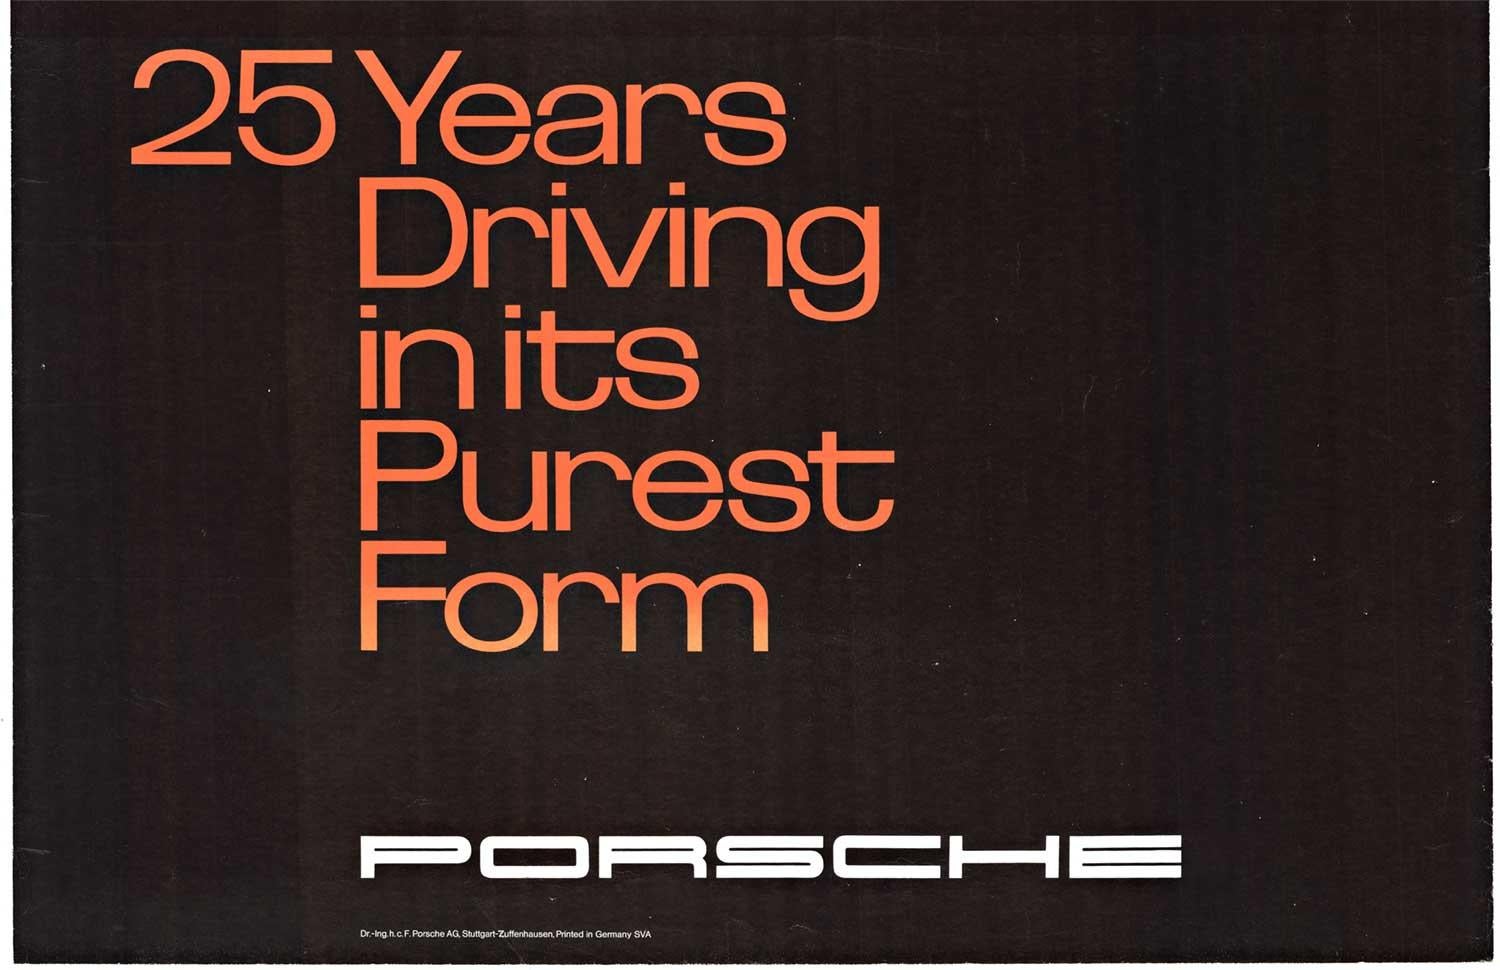 Original Porsche '25 Years Driving in its Purest Form' vintage factory poster - Print by Unknown